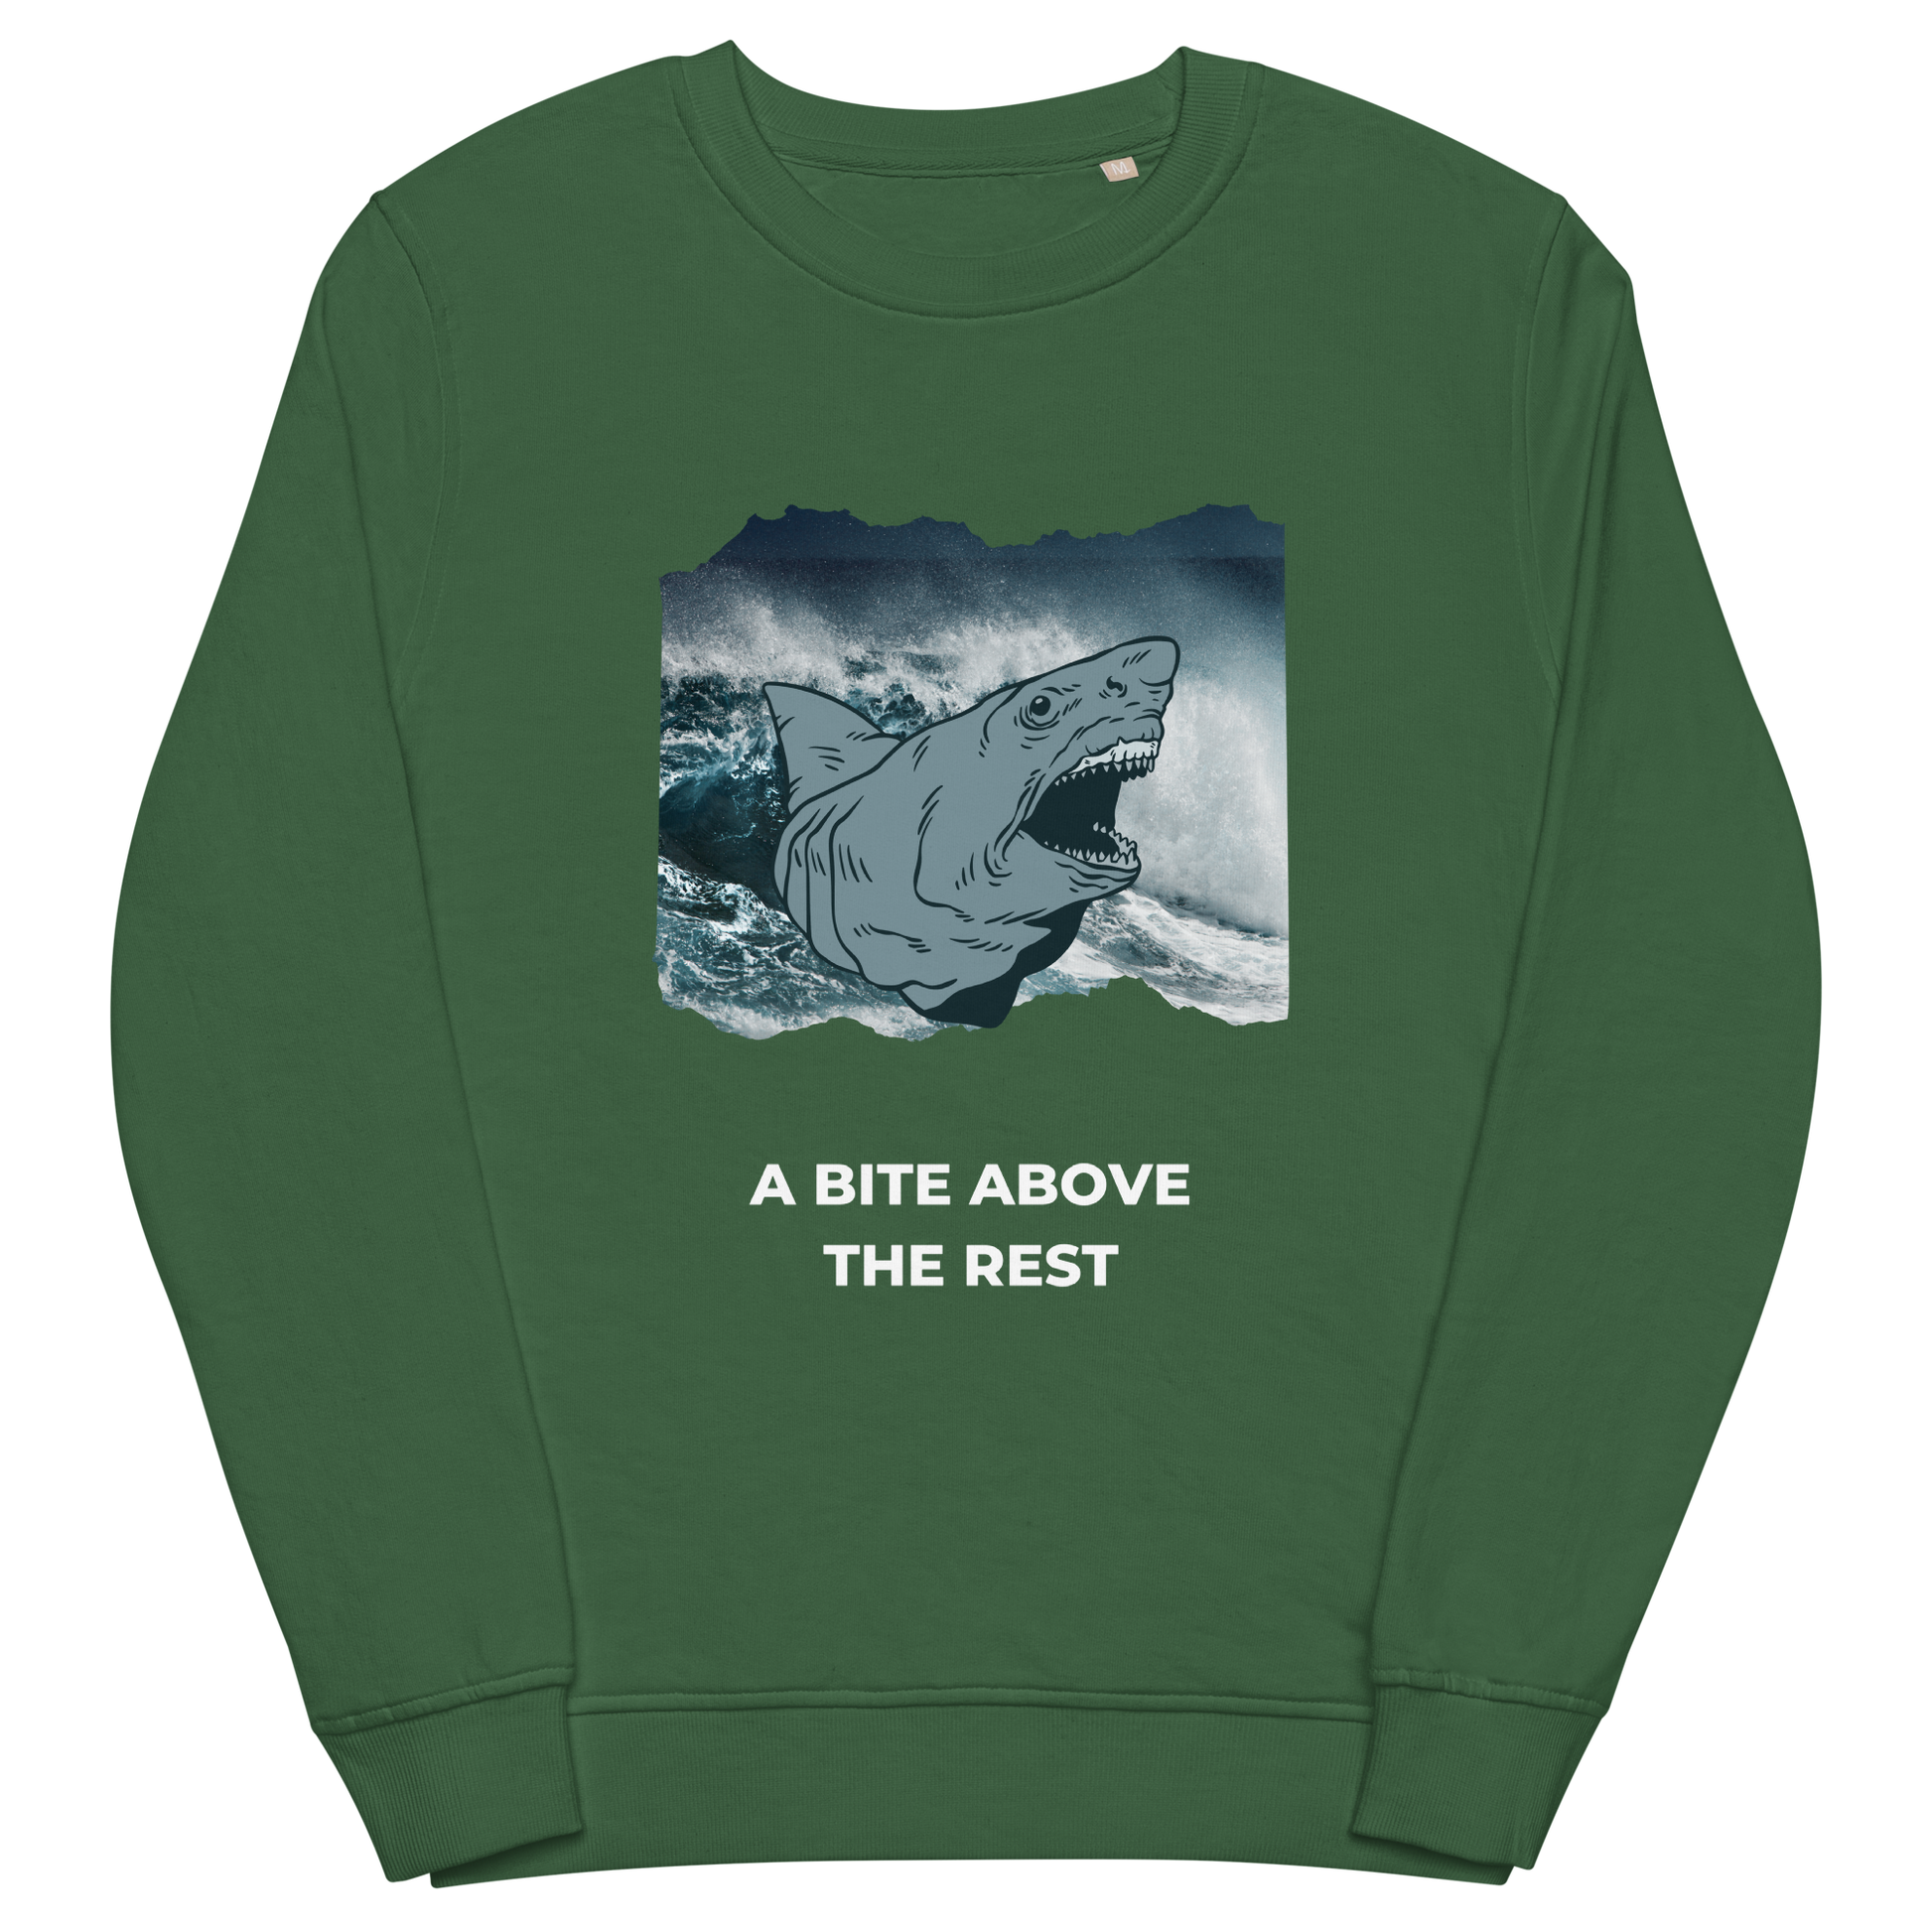 Bottle Green Organic Cotton Megalodon Sweatshirt featuring the jaw-dropping 'A Bite Above the Rest' graphic on the chest - Funny Graphic Megalodon Sweatshirts - Boozy Fox